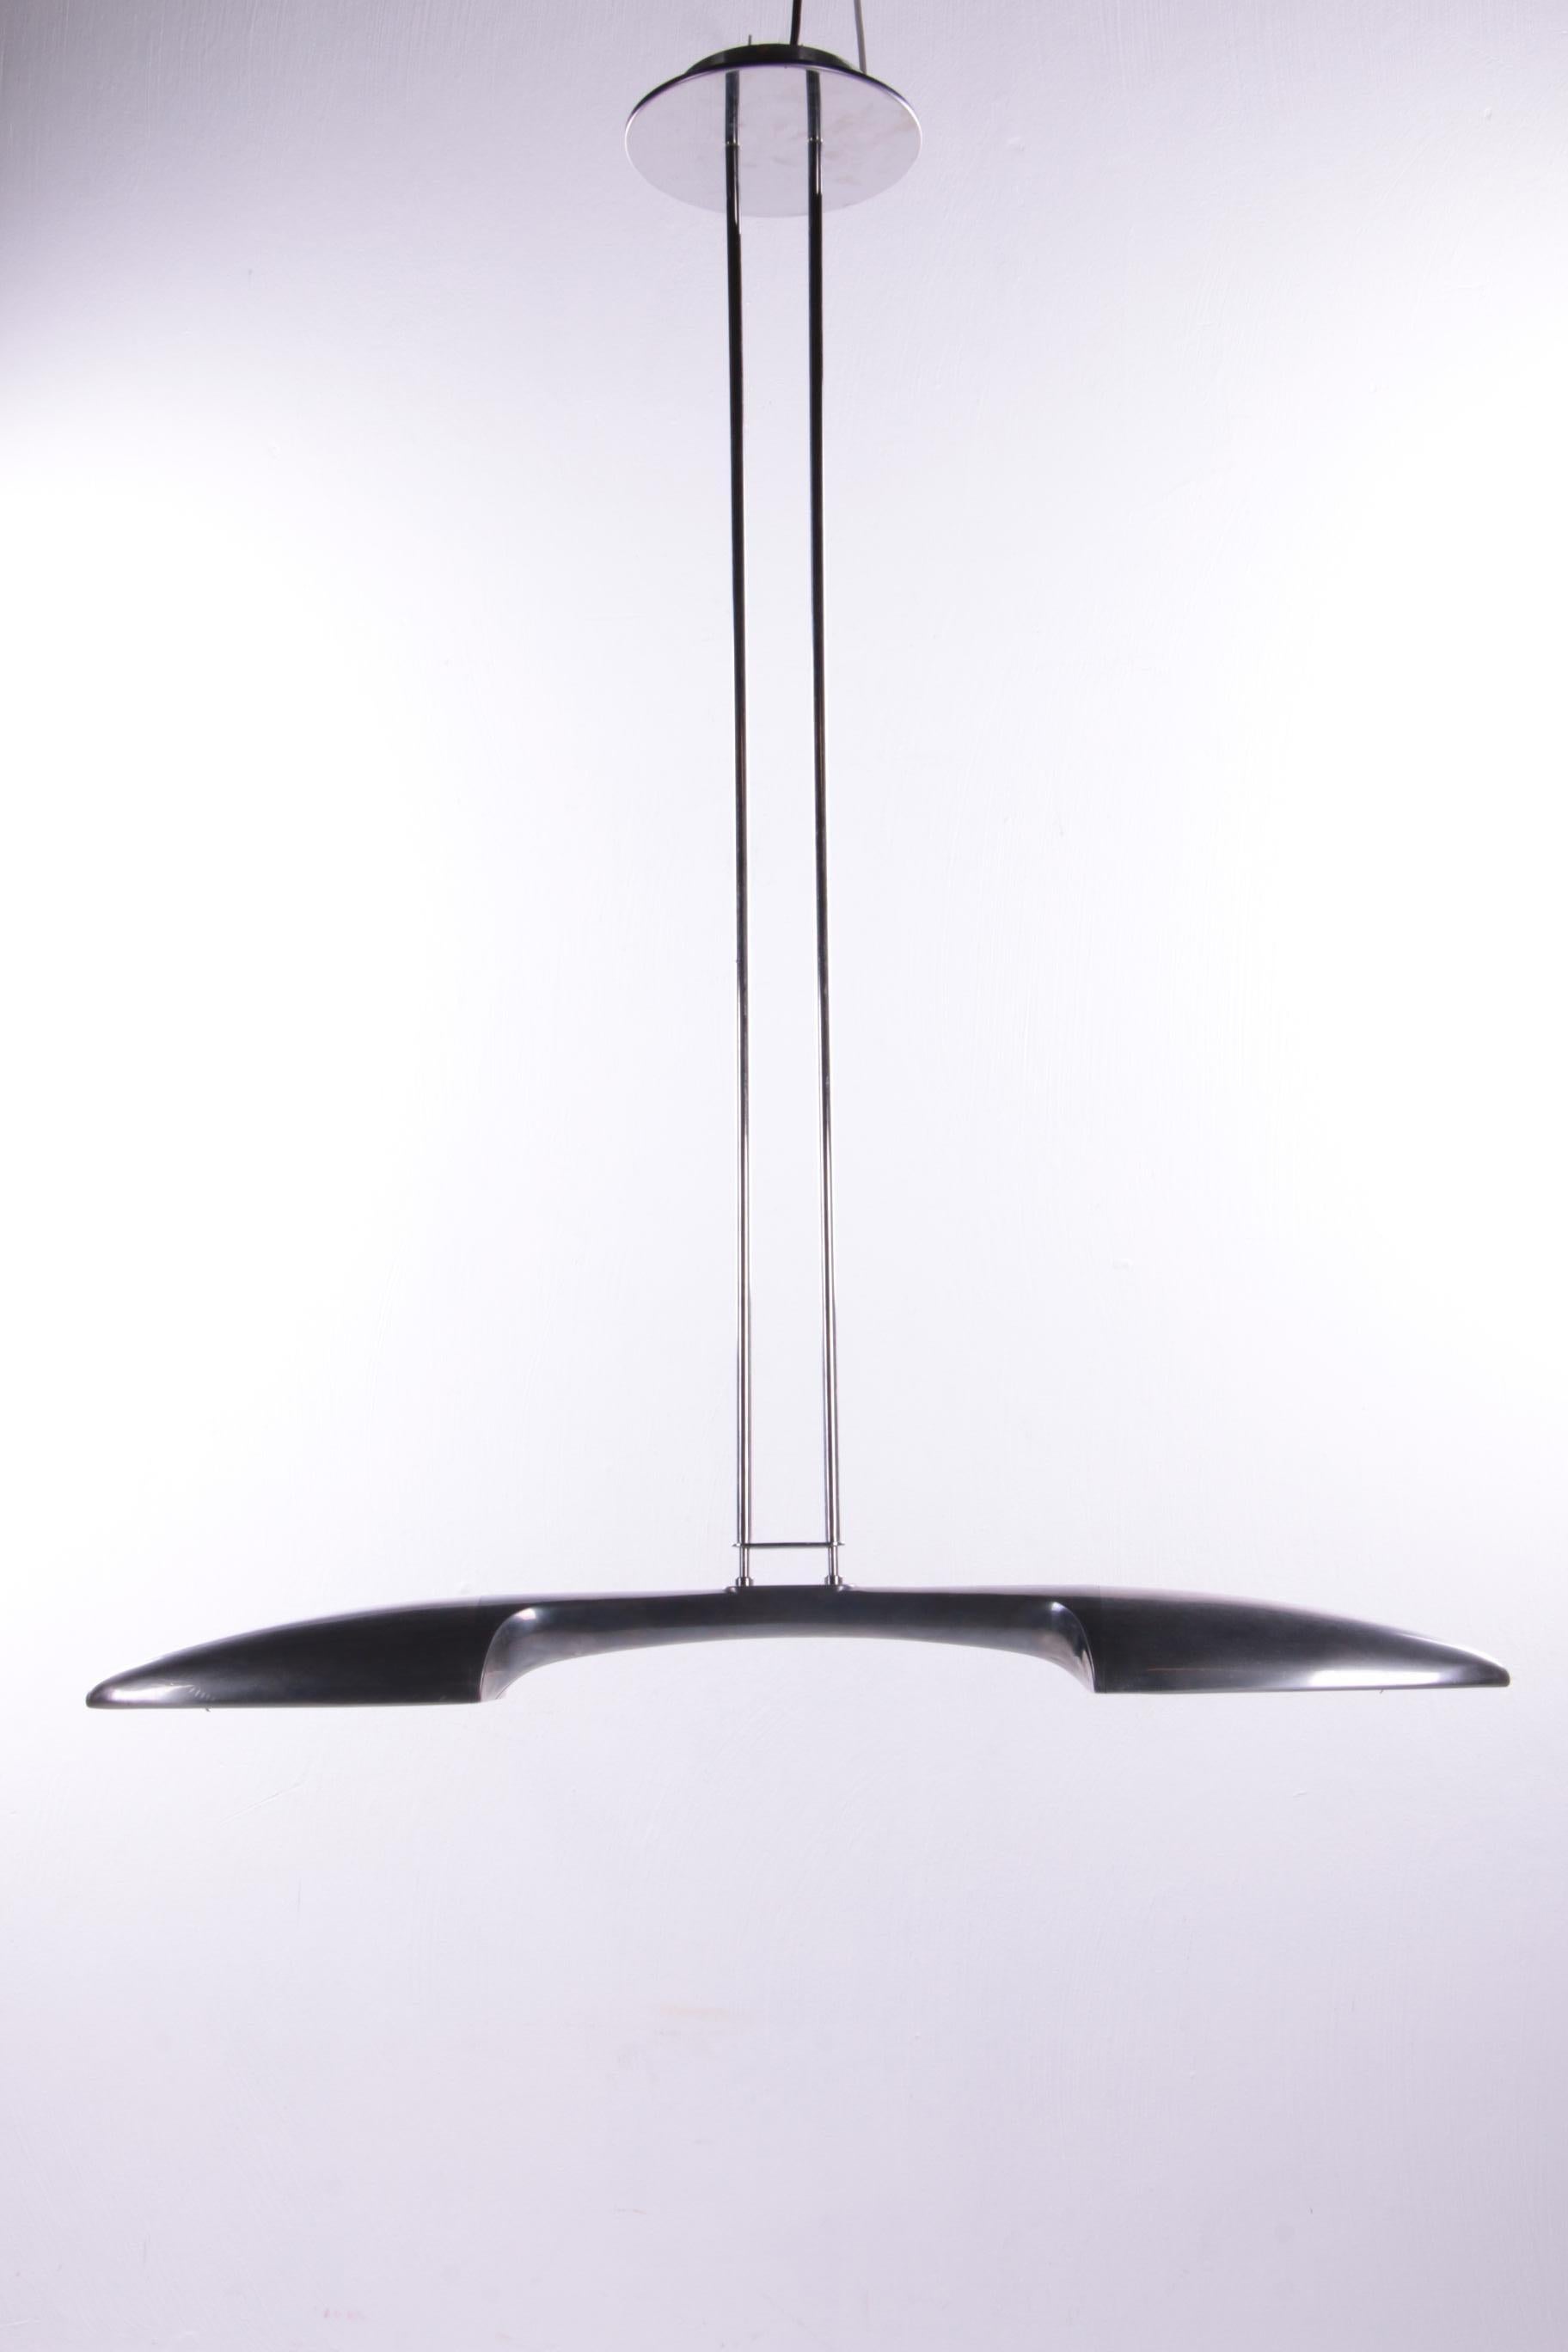 Hanging lamp Aluminum design by Jorge Pensi for B-Lux Spain 1980


Special hanging lamp by the widely respected designer Jorge Pensi.

Mainly known for its chairs, but a connoisseur who takes a good look at this lamp immediately recognizes the